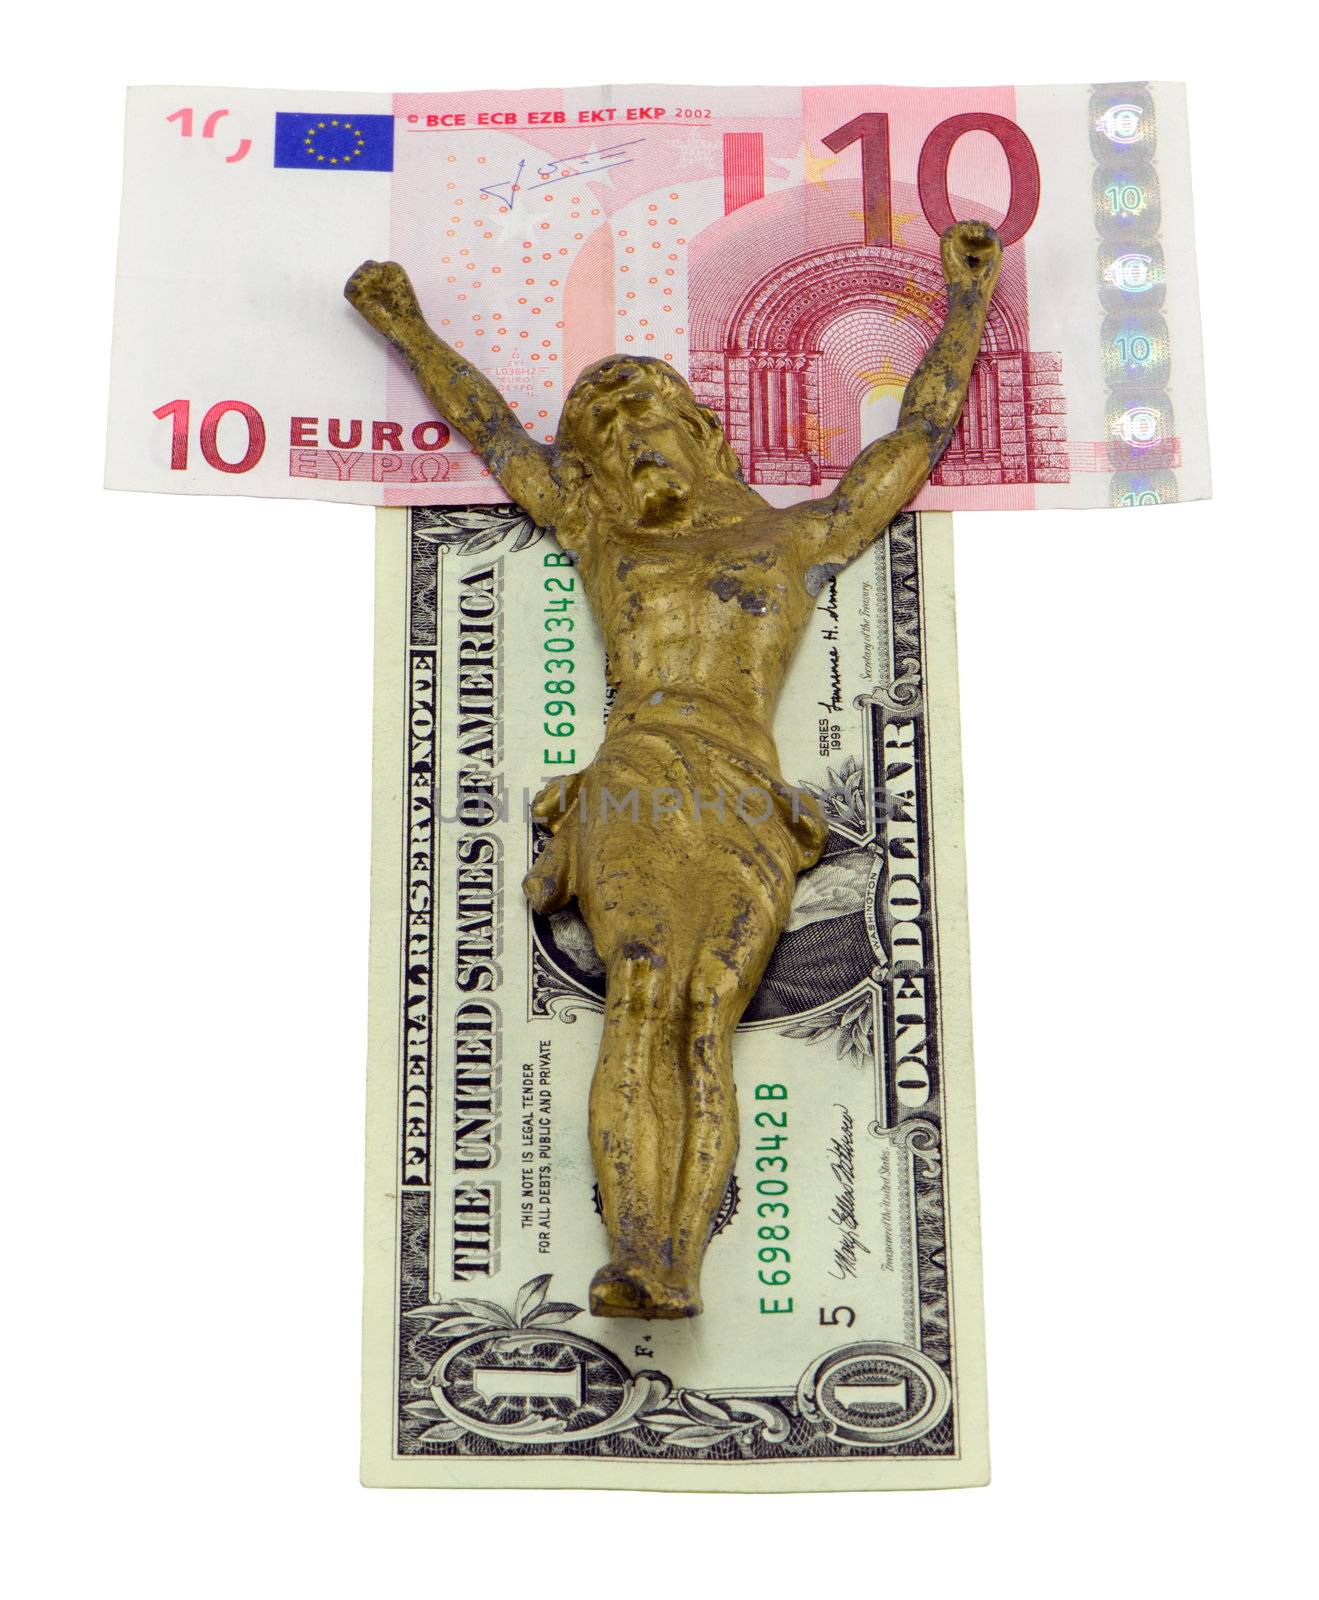 Gold jesus crucify on euro and dollar banknotes isolated on white. Concept of world finance crisis. Ten euro and one dollar banknotes.